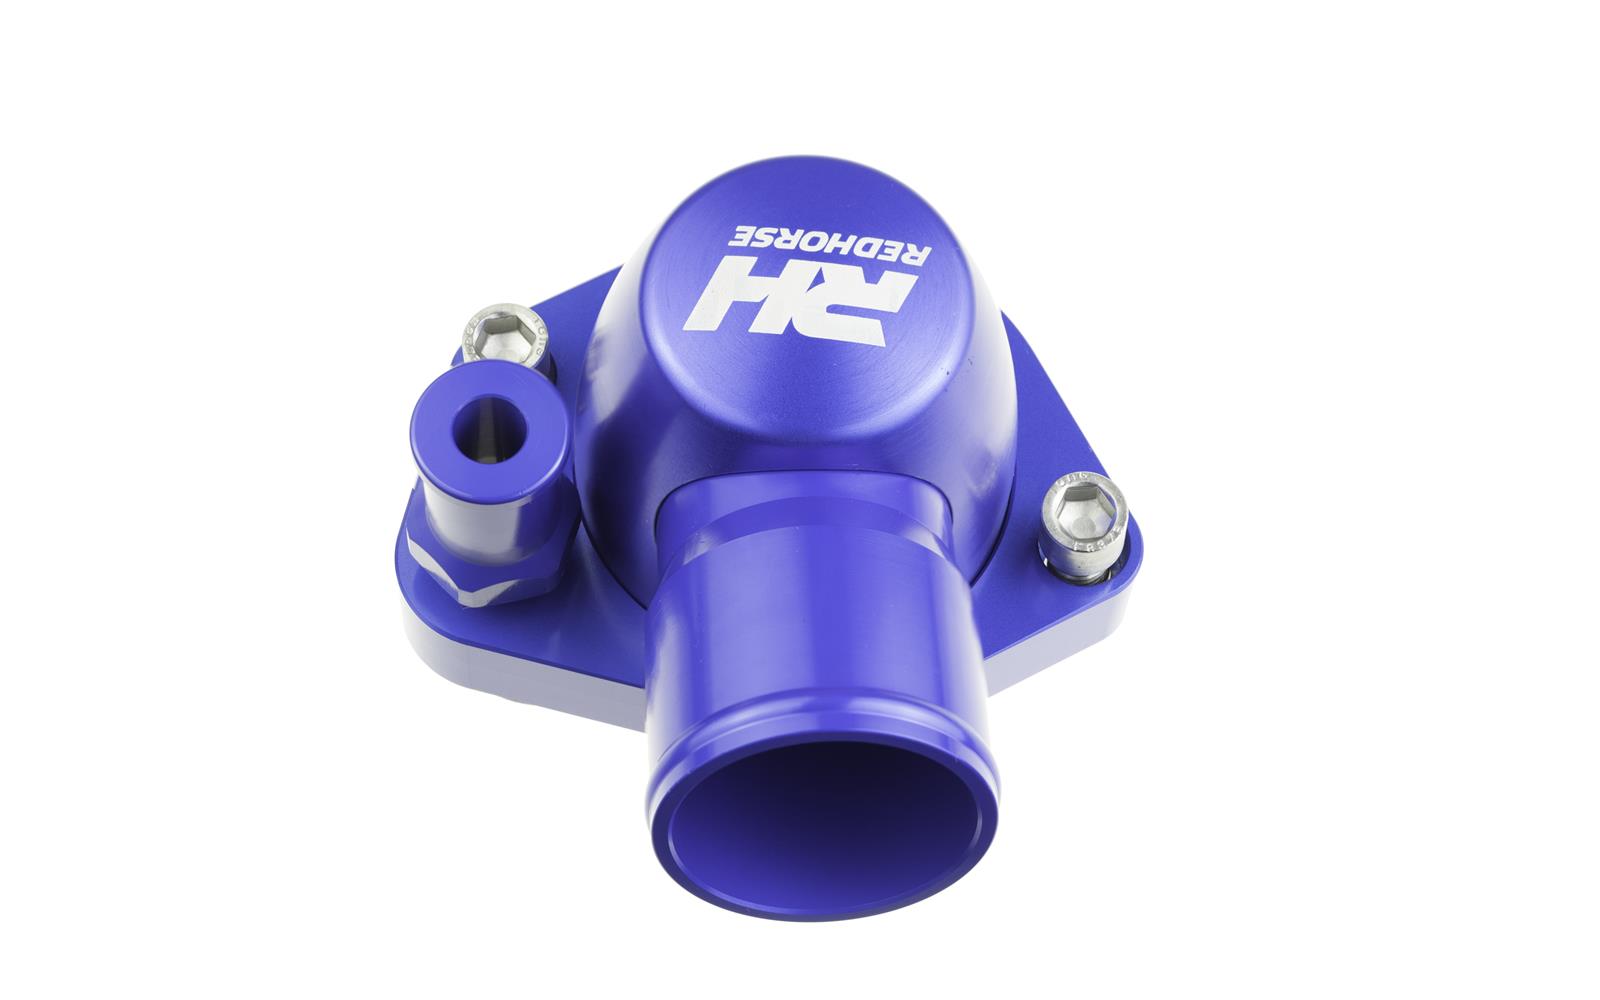 Redhorse Performance 4910-302-20-1 Aluminum Water Neck 1.25in Hose for SBF 260/289/302 and 351 W ENGINE - Blue